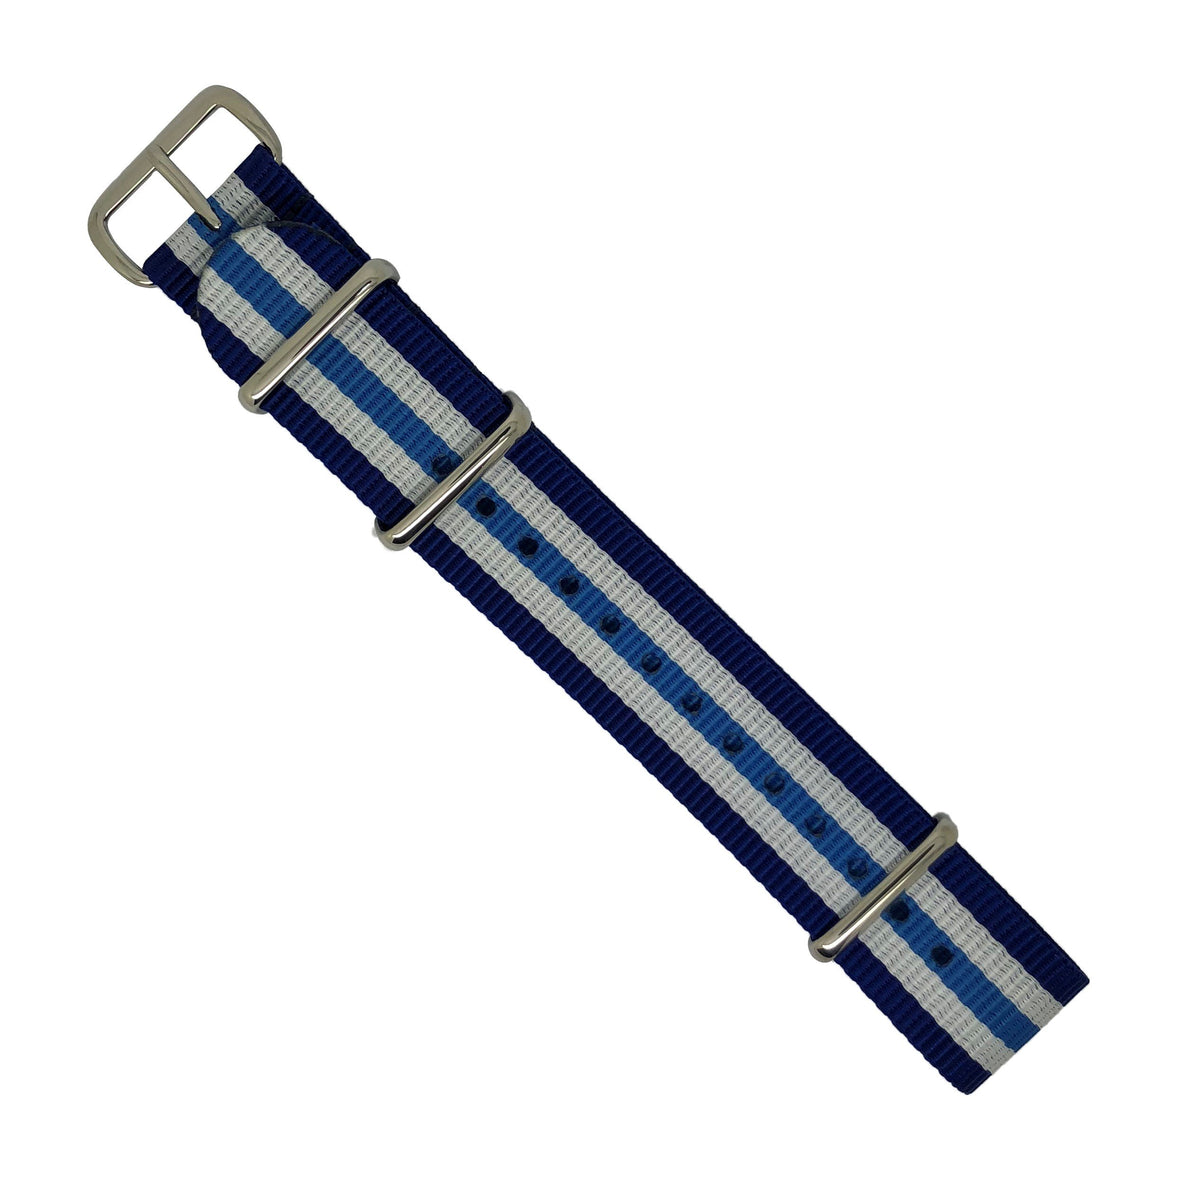 Premium Nato Strap in Regimental Blue with Polished Silver Buckle (20mm) - Nomad Watch Works Malaysia